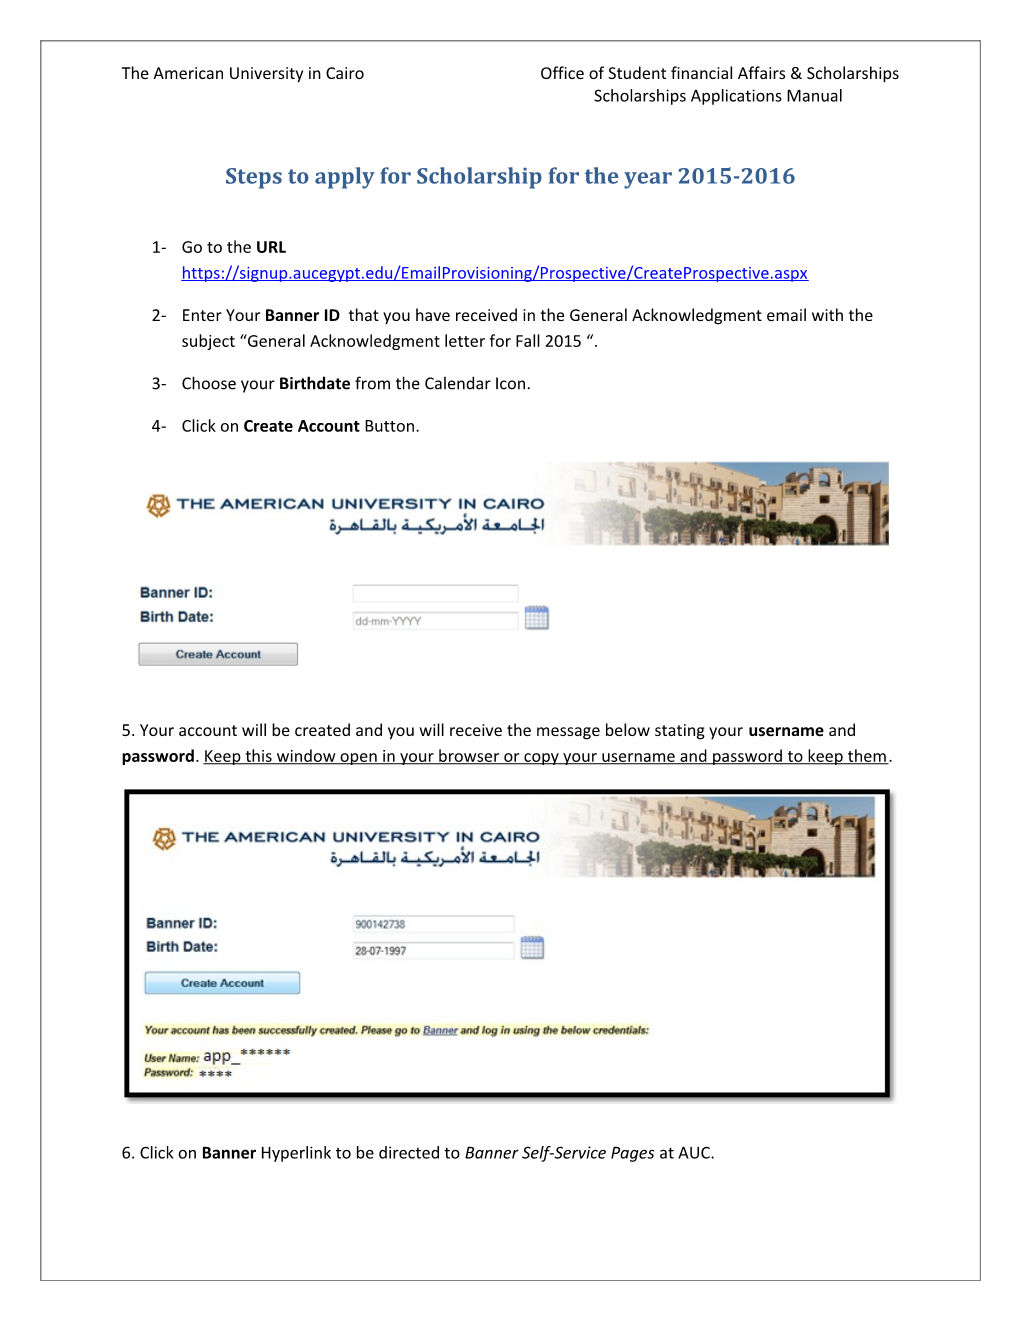 Steps to Apply for Scholarship for the Year 2015-2016